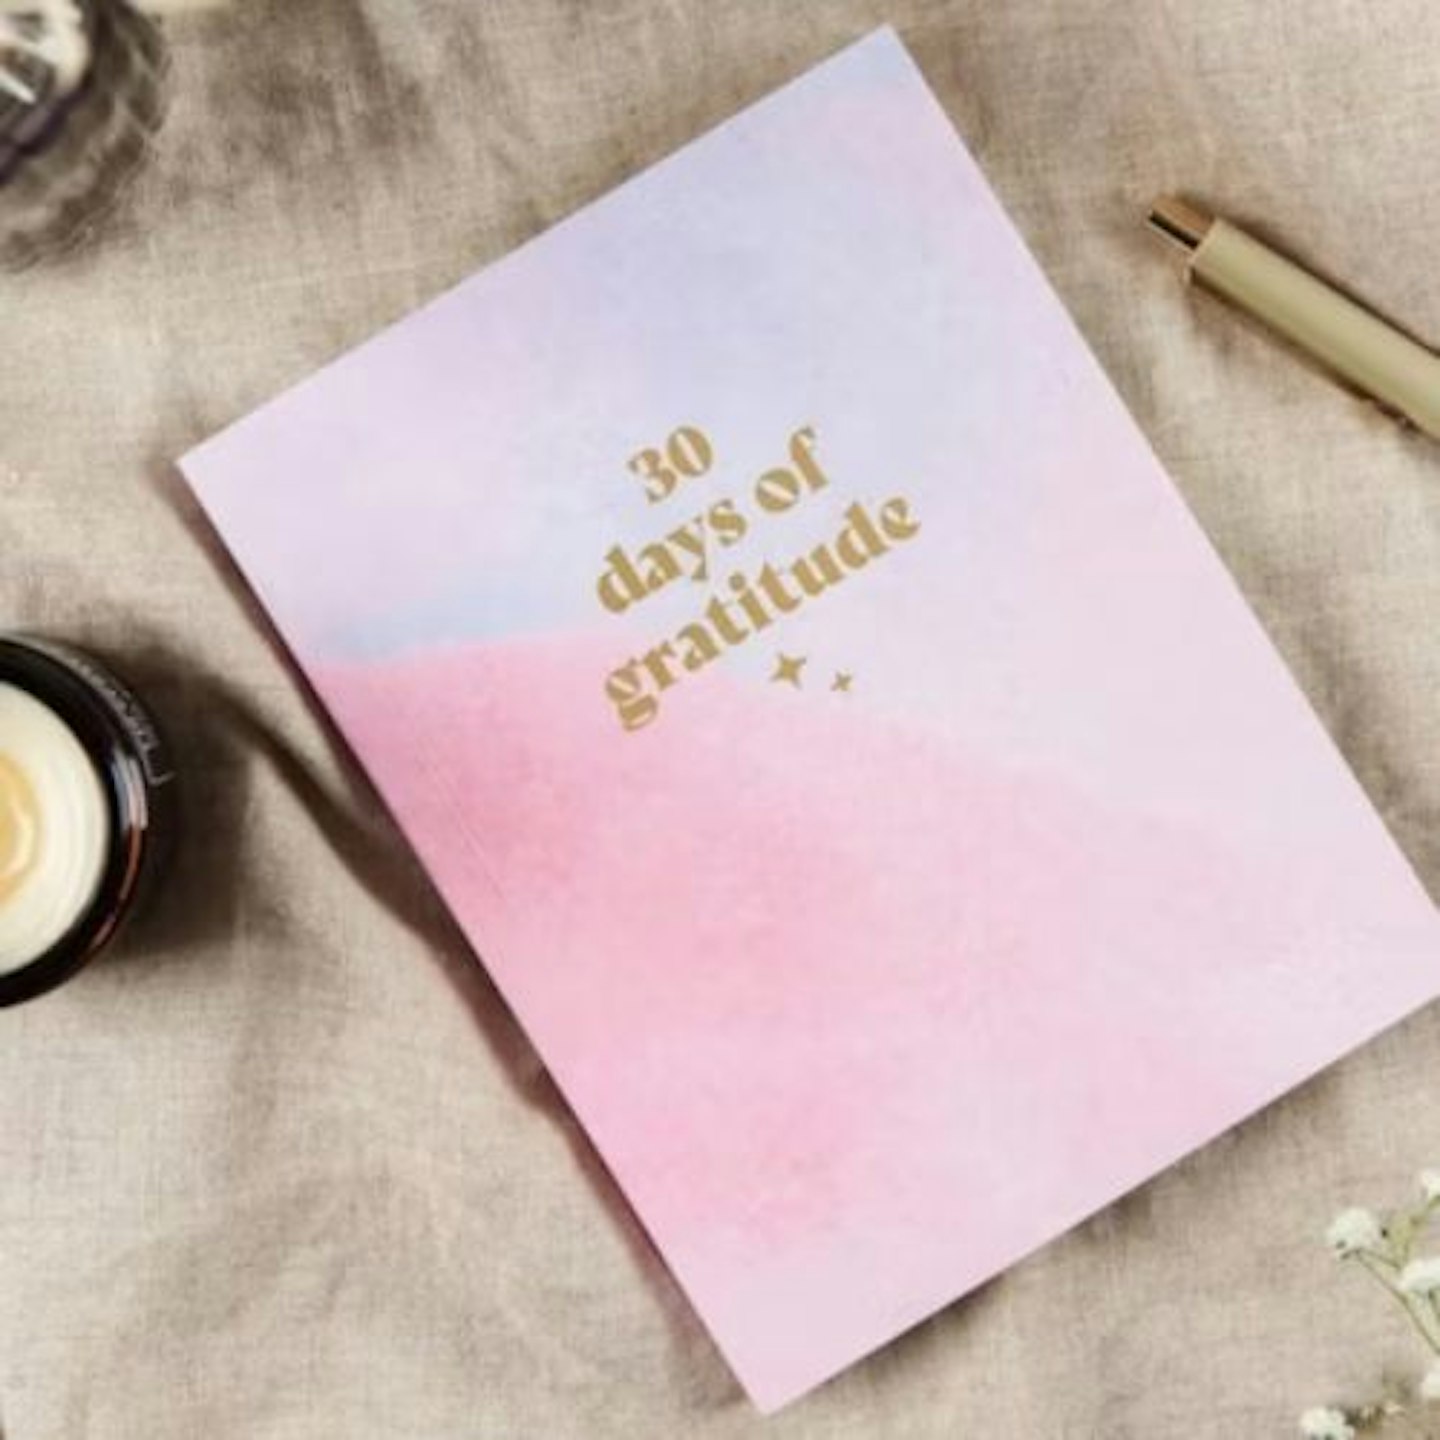 Mindfulness and Gratitude 30 Day Notebook - Everyday Wellness, Gratitude Challenge, Diary for Reflection